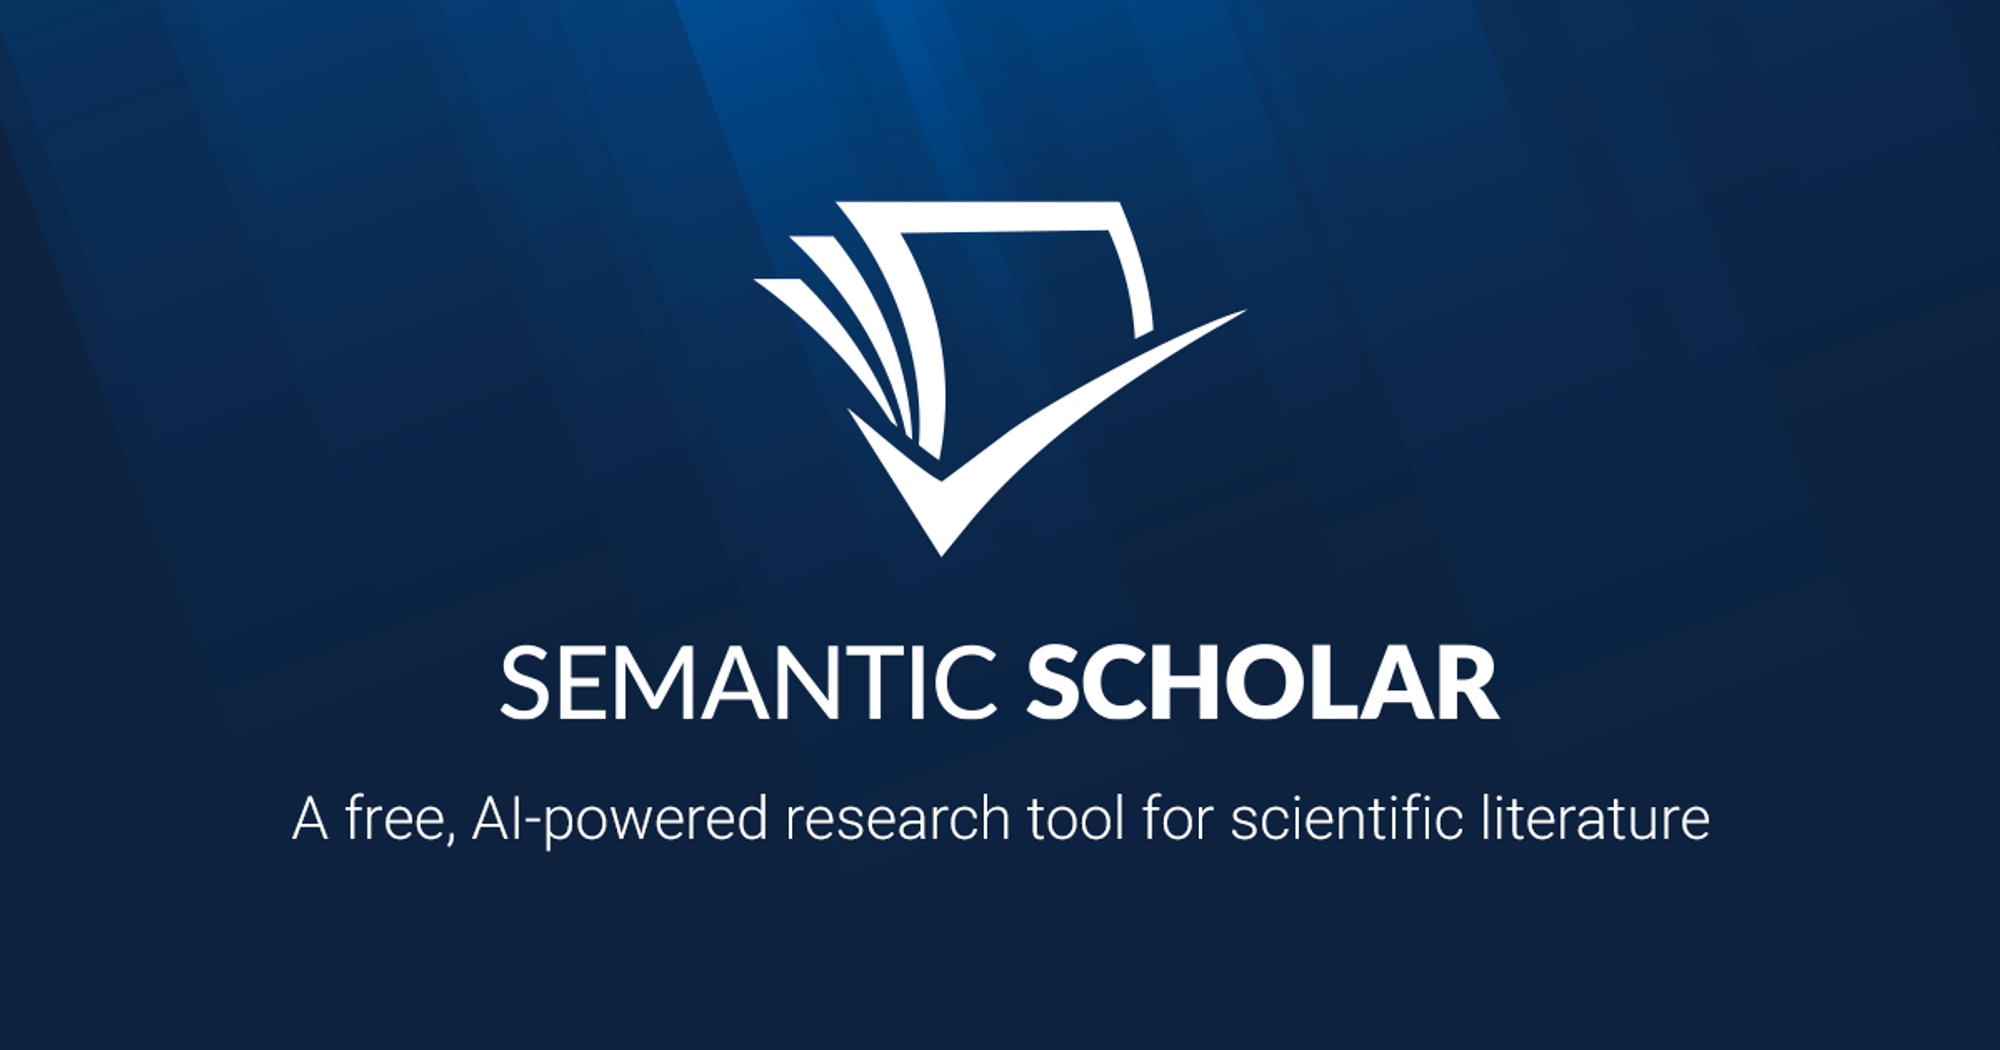 [PDF] Low-frequency MTF estimation for digital imaging devices using slanted-edge analysis | Semantic Scholar